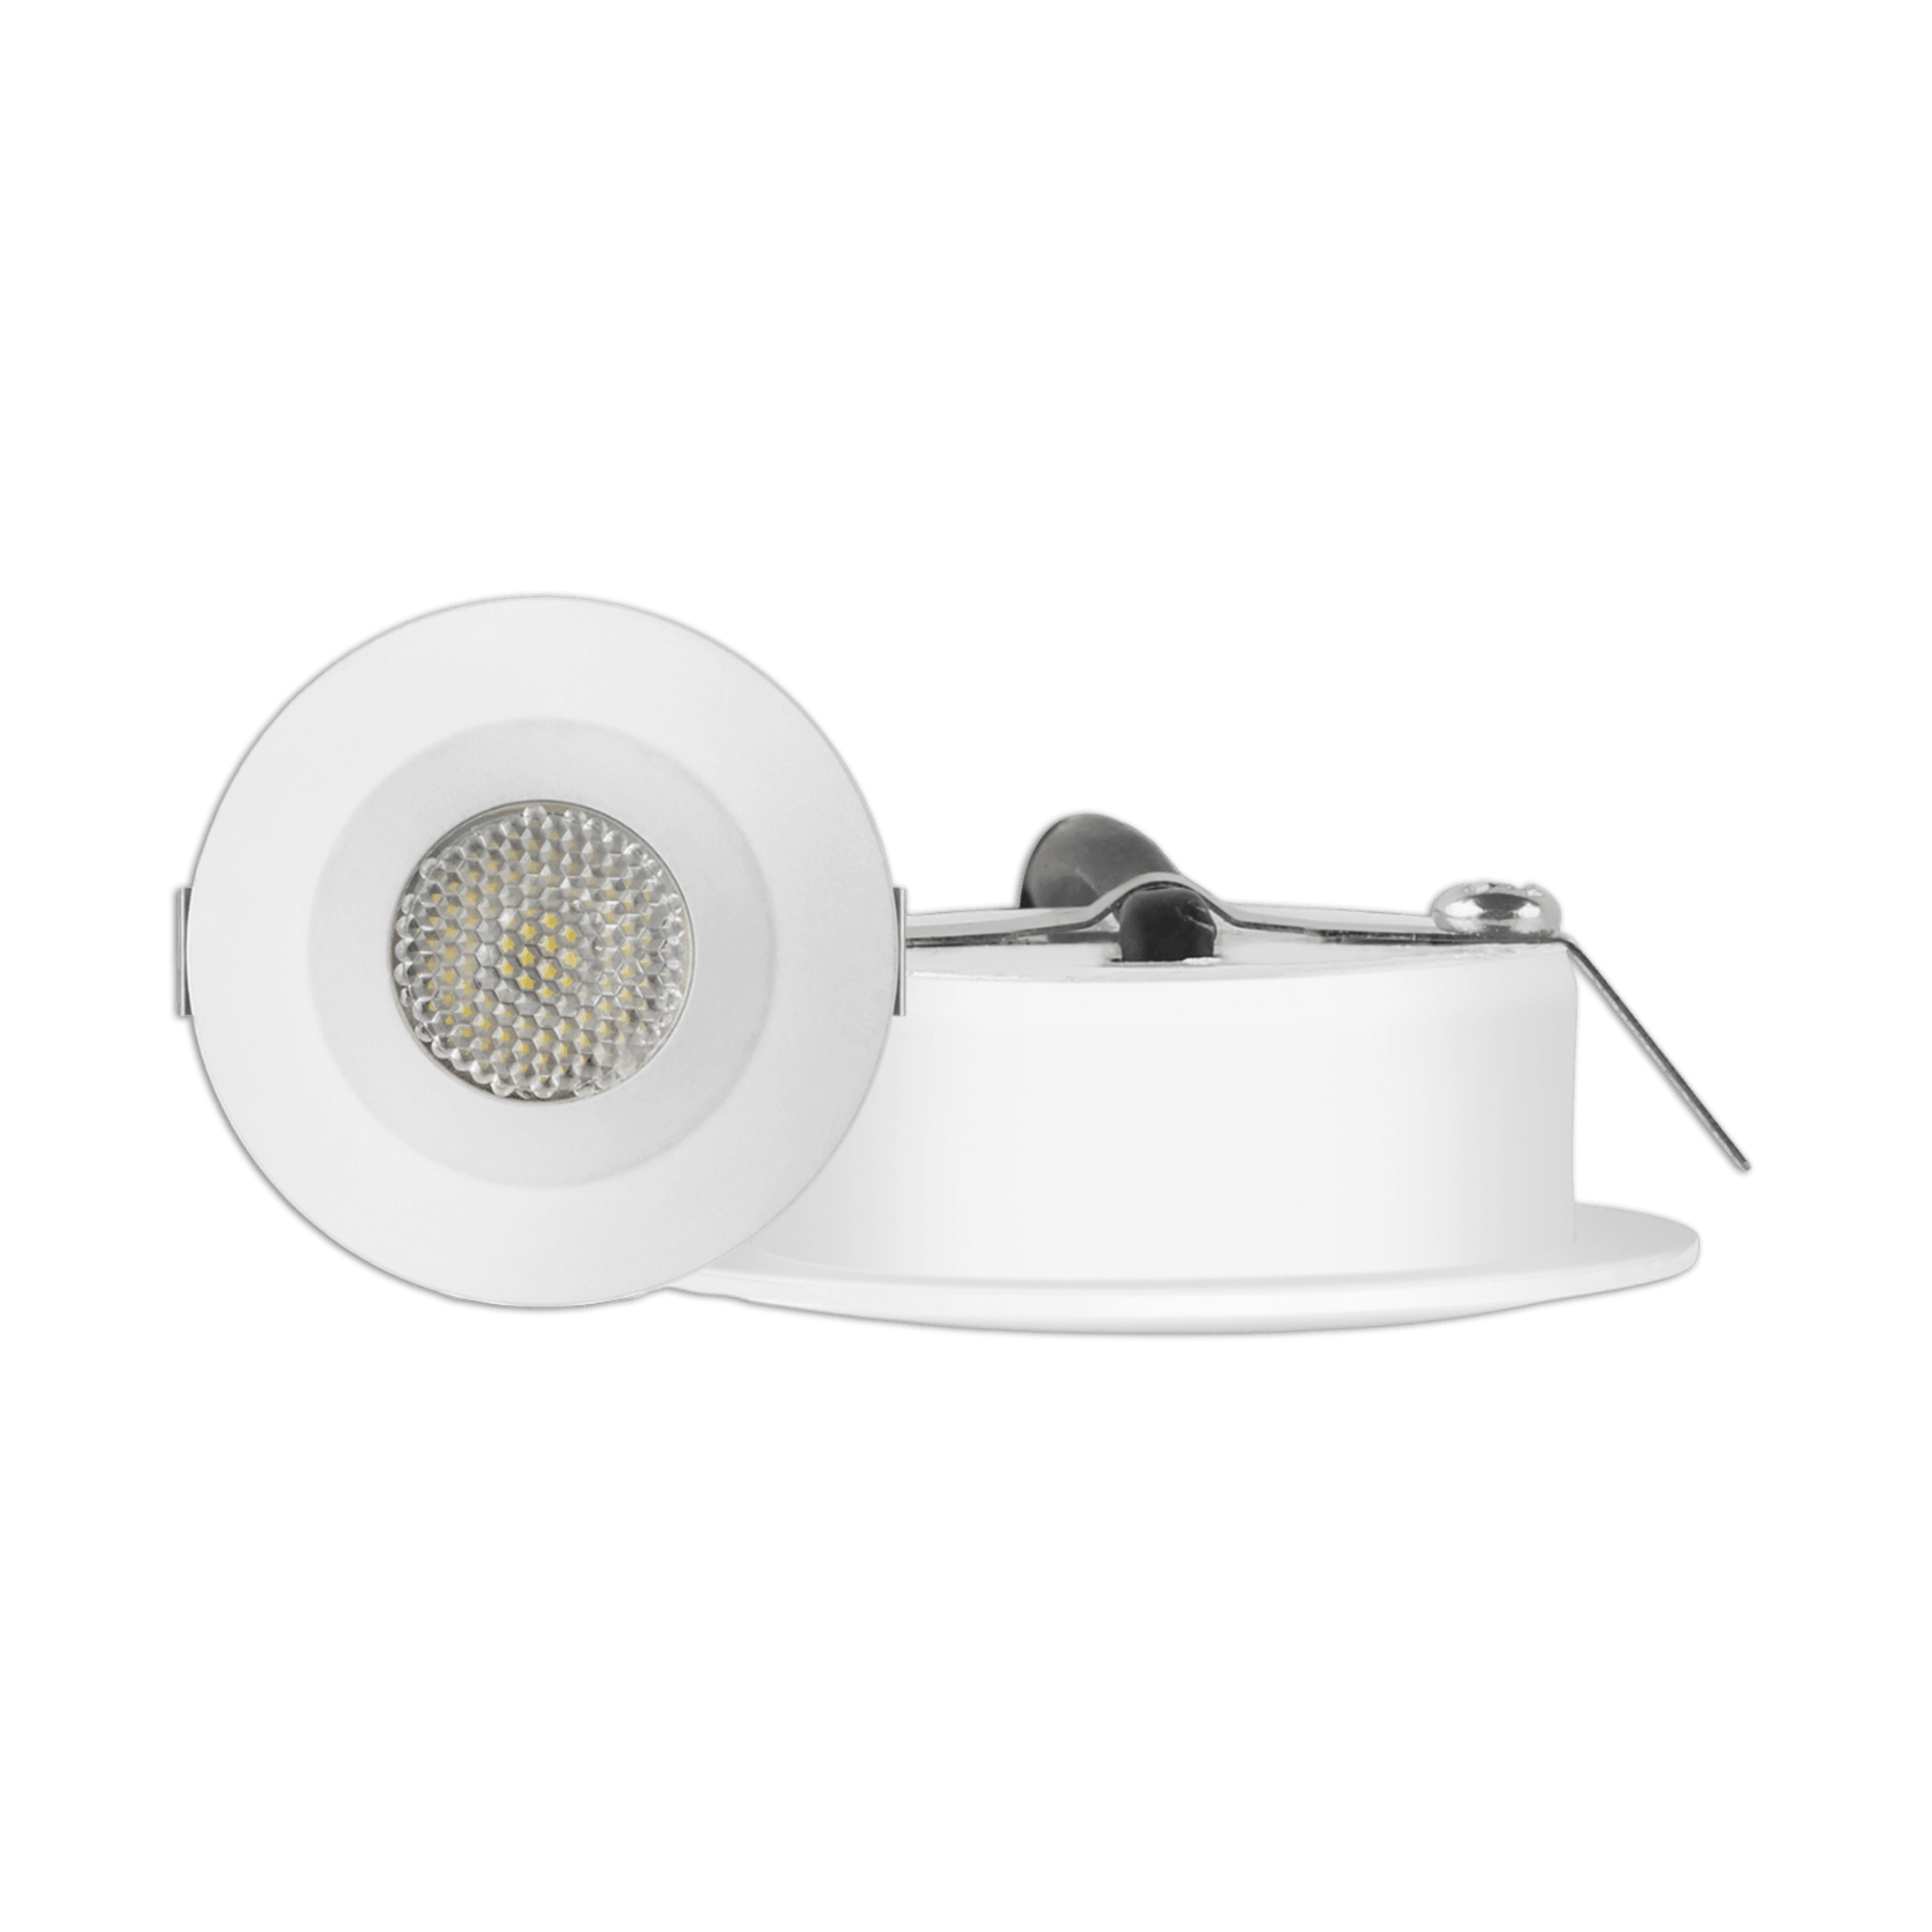 Buy LED Ceiling Lights for Home Online at Best Price | Orient Electric